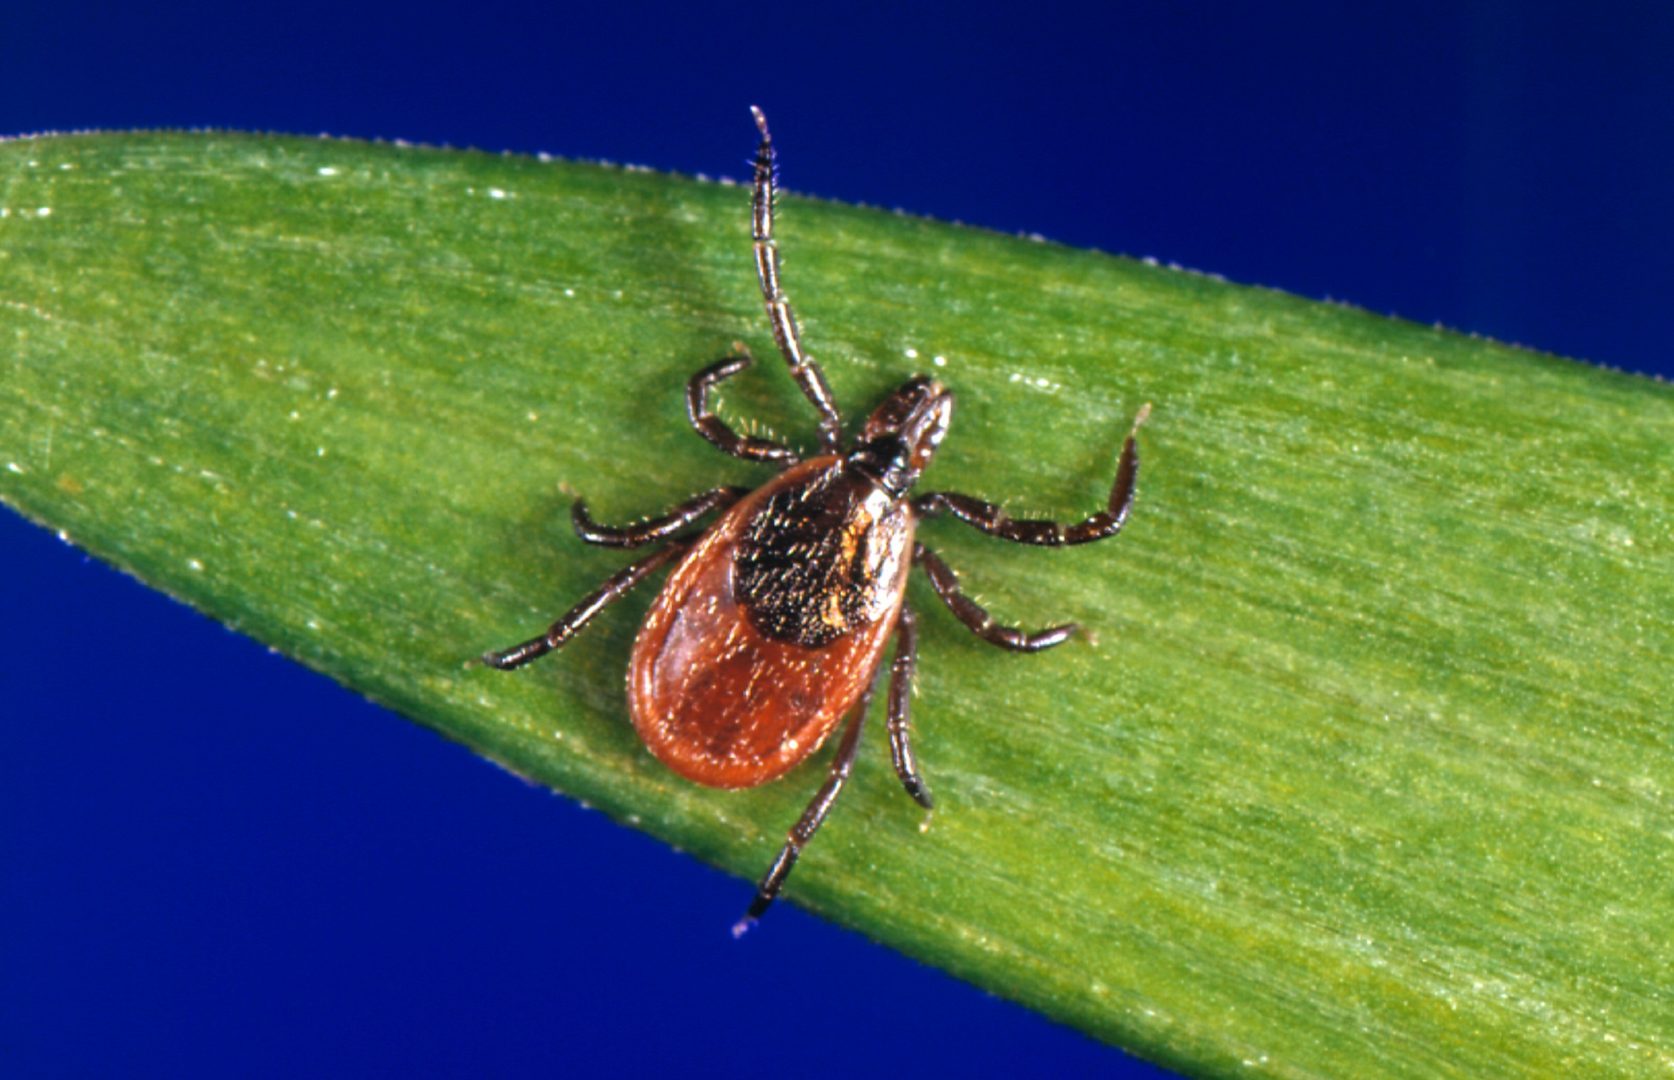 This undated photo provided by the U.S. Centers for Disease Control and Prevention (CDC) shows a blacklegged tick - also known as a deer tick. 